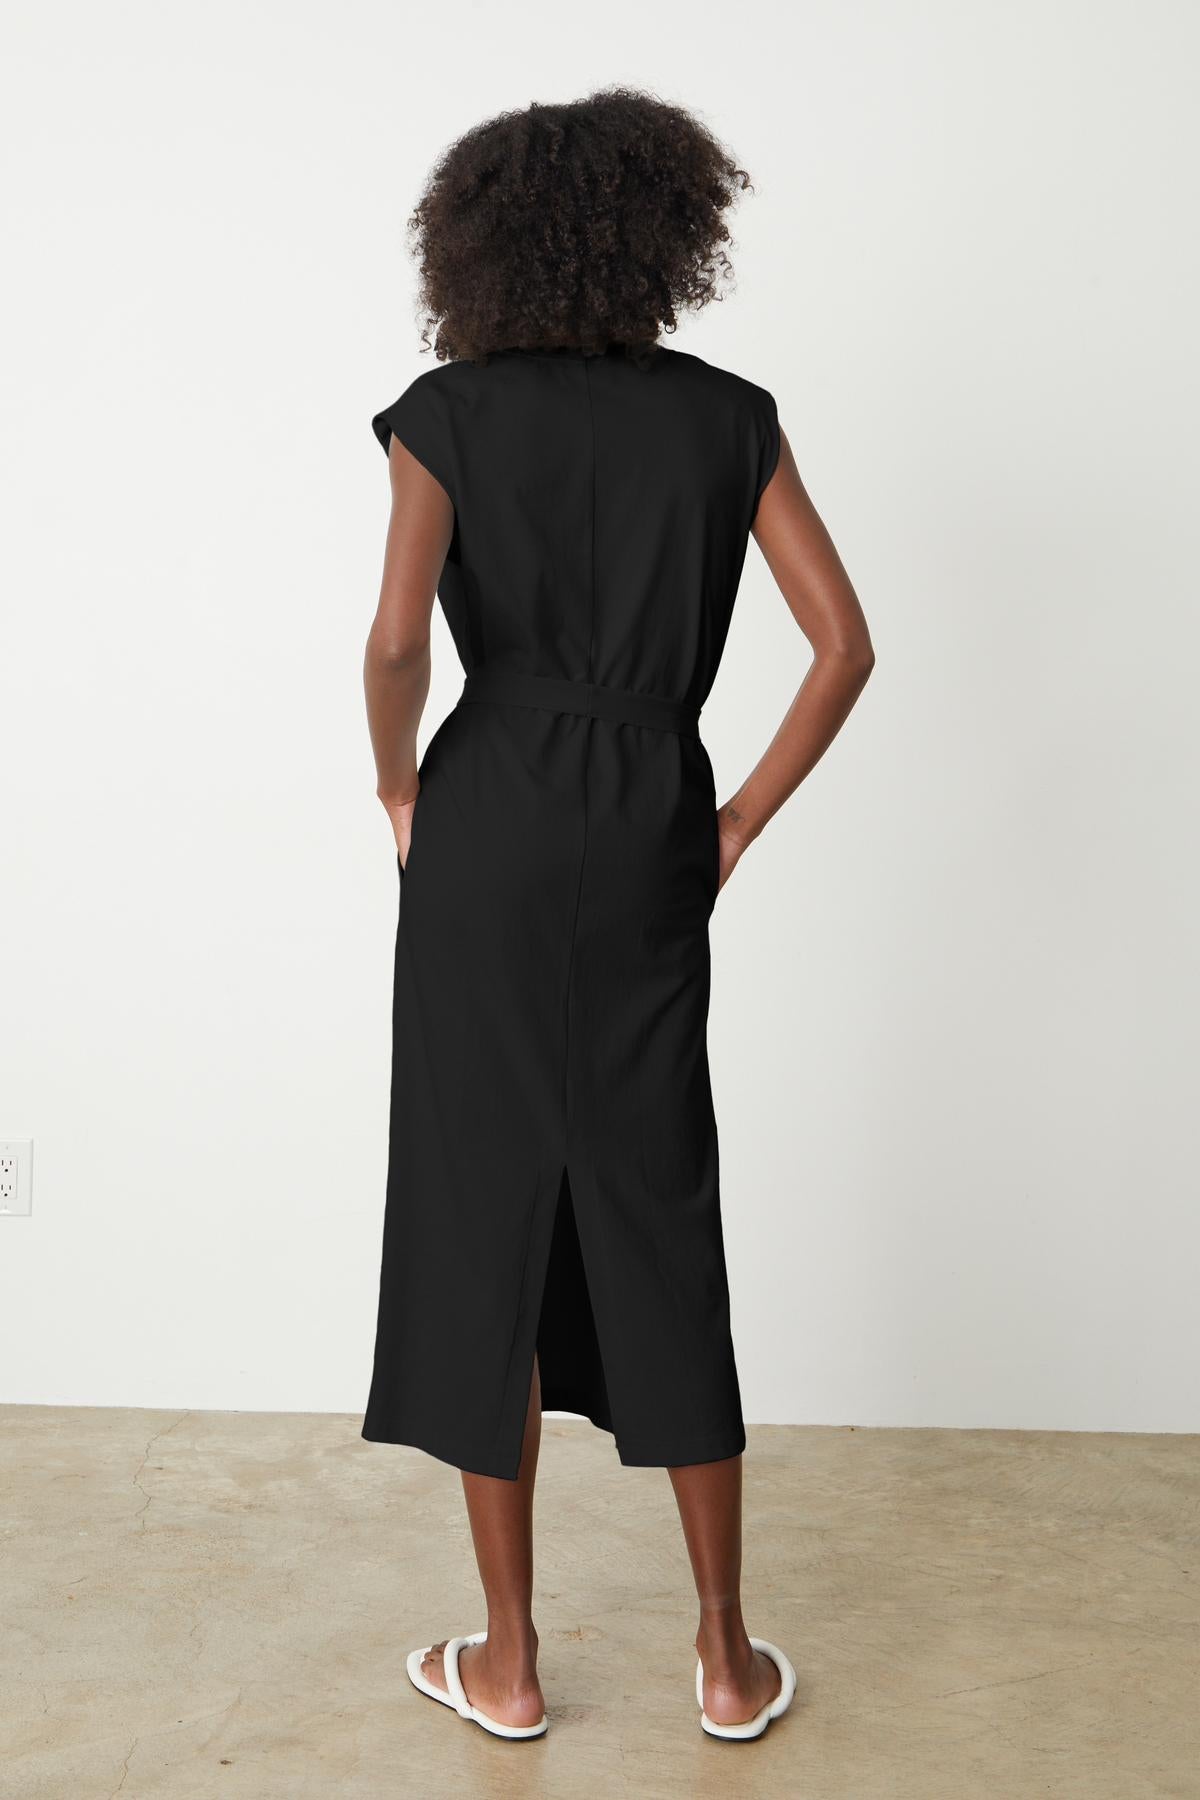 The back view of a woman wearing a Velvet by Graham & Spencer column silhouette midi dress with a detachable belt.-35201180369089